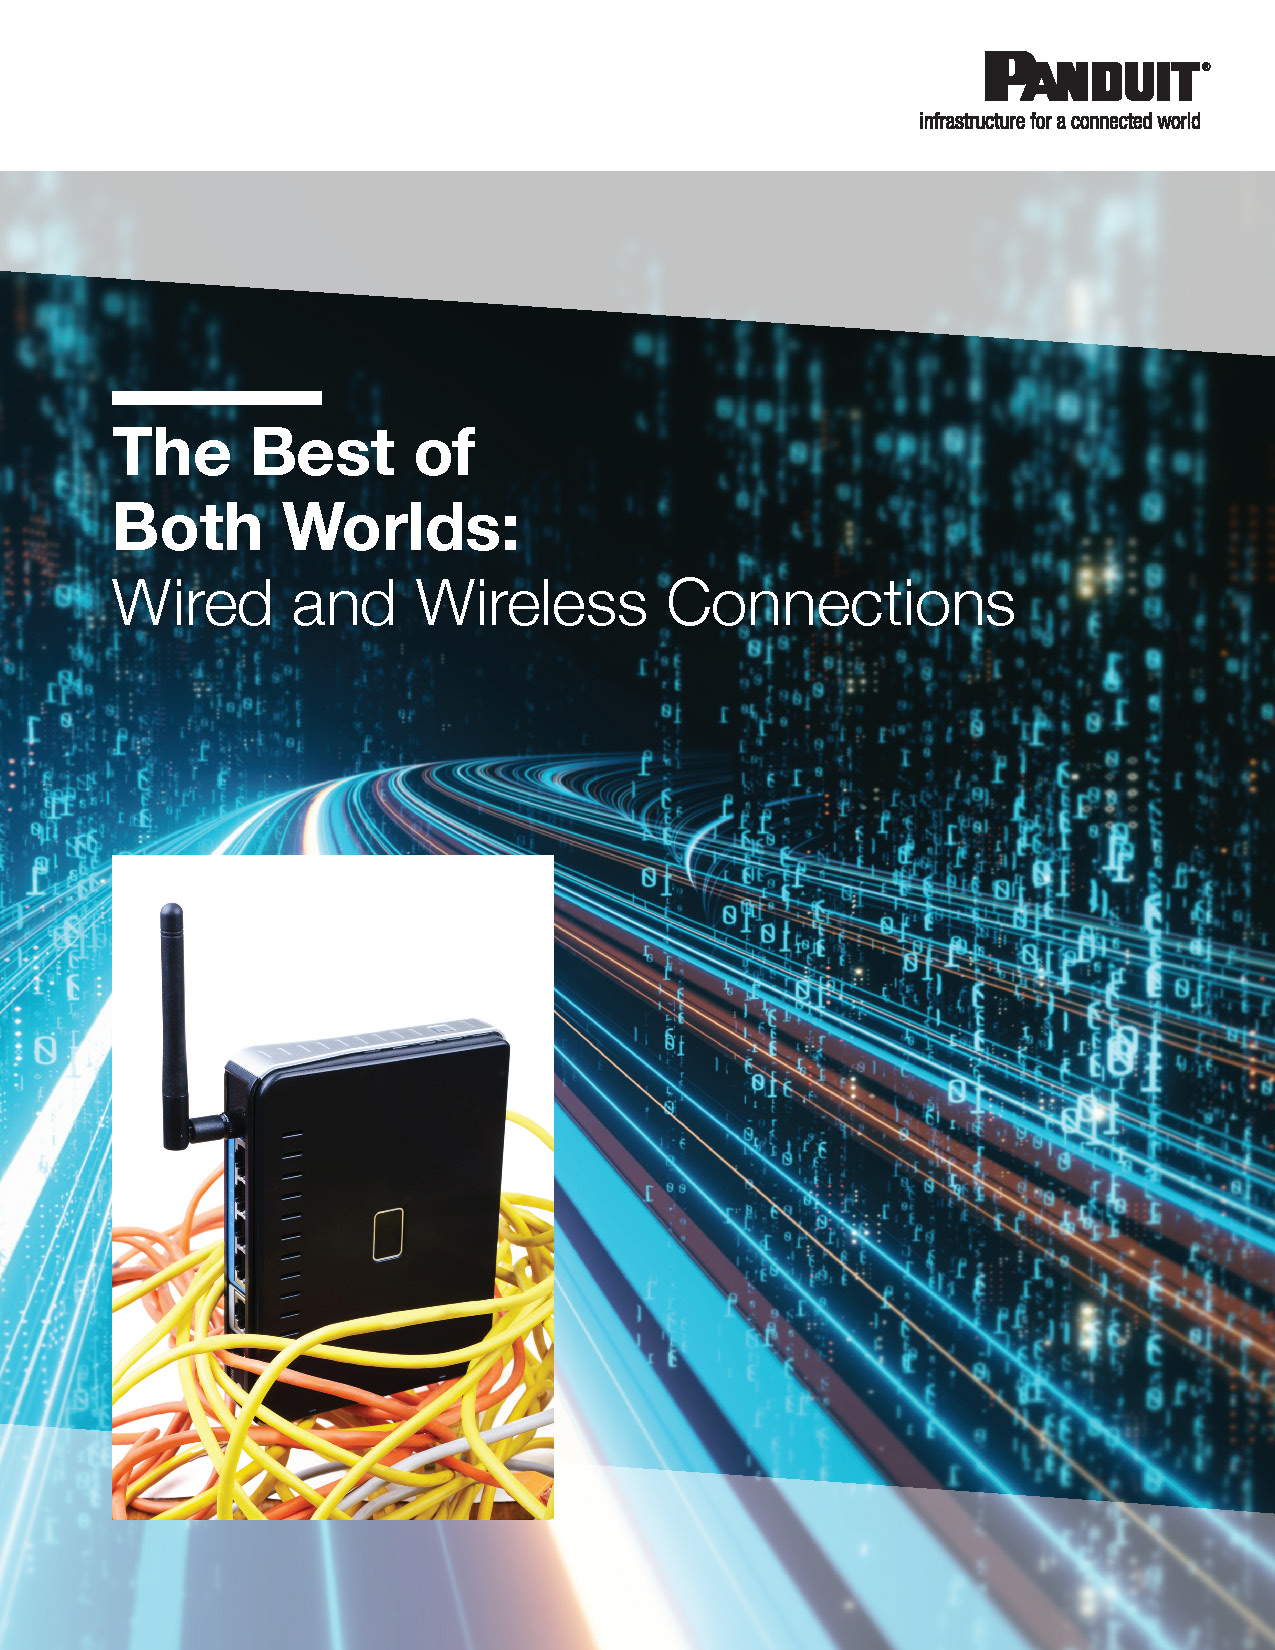 The Best of Both Worlds: Wired and Wireless Connections White Paper